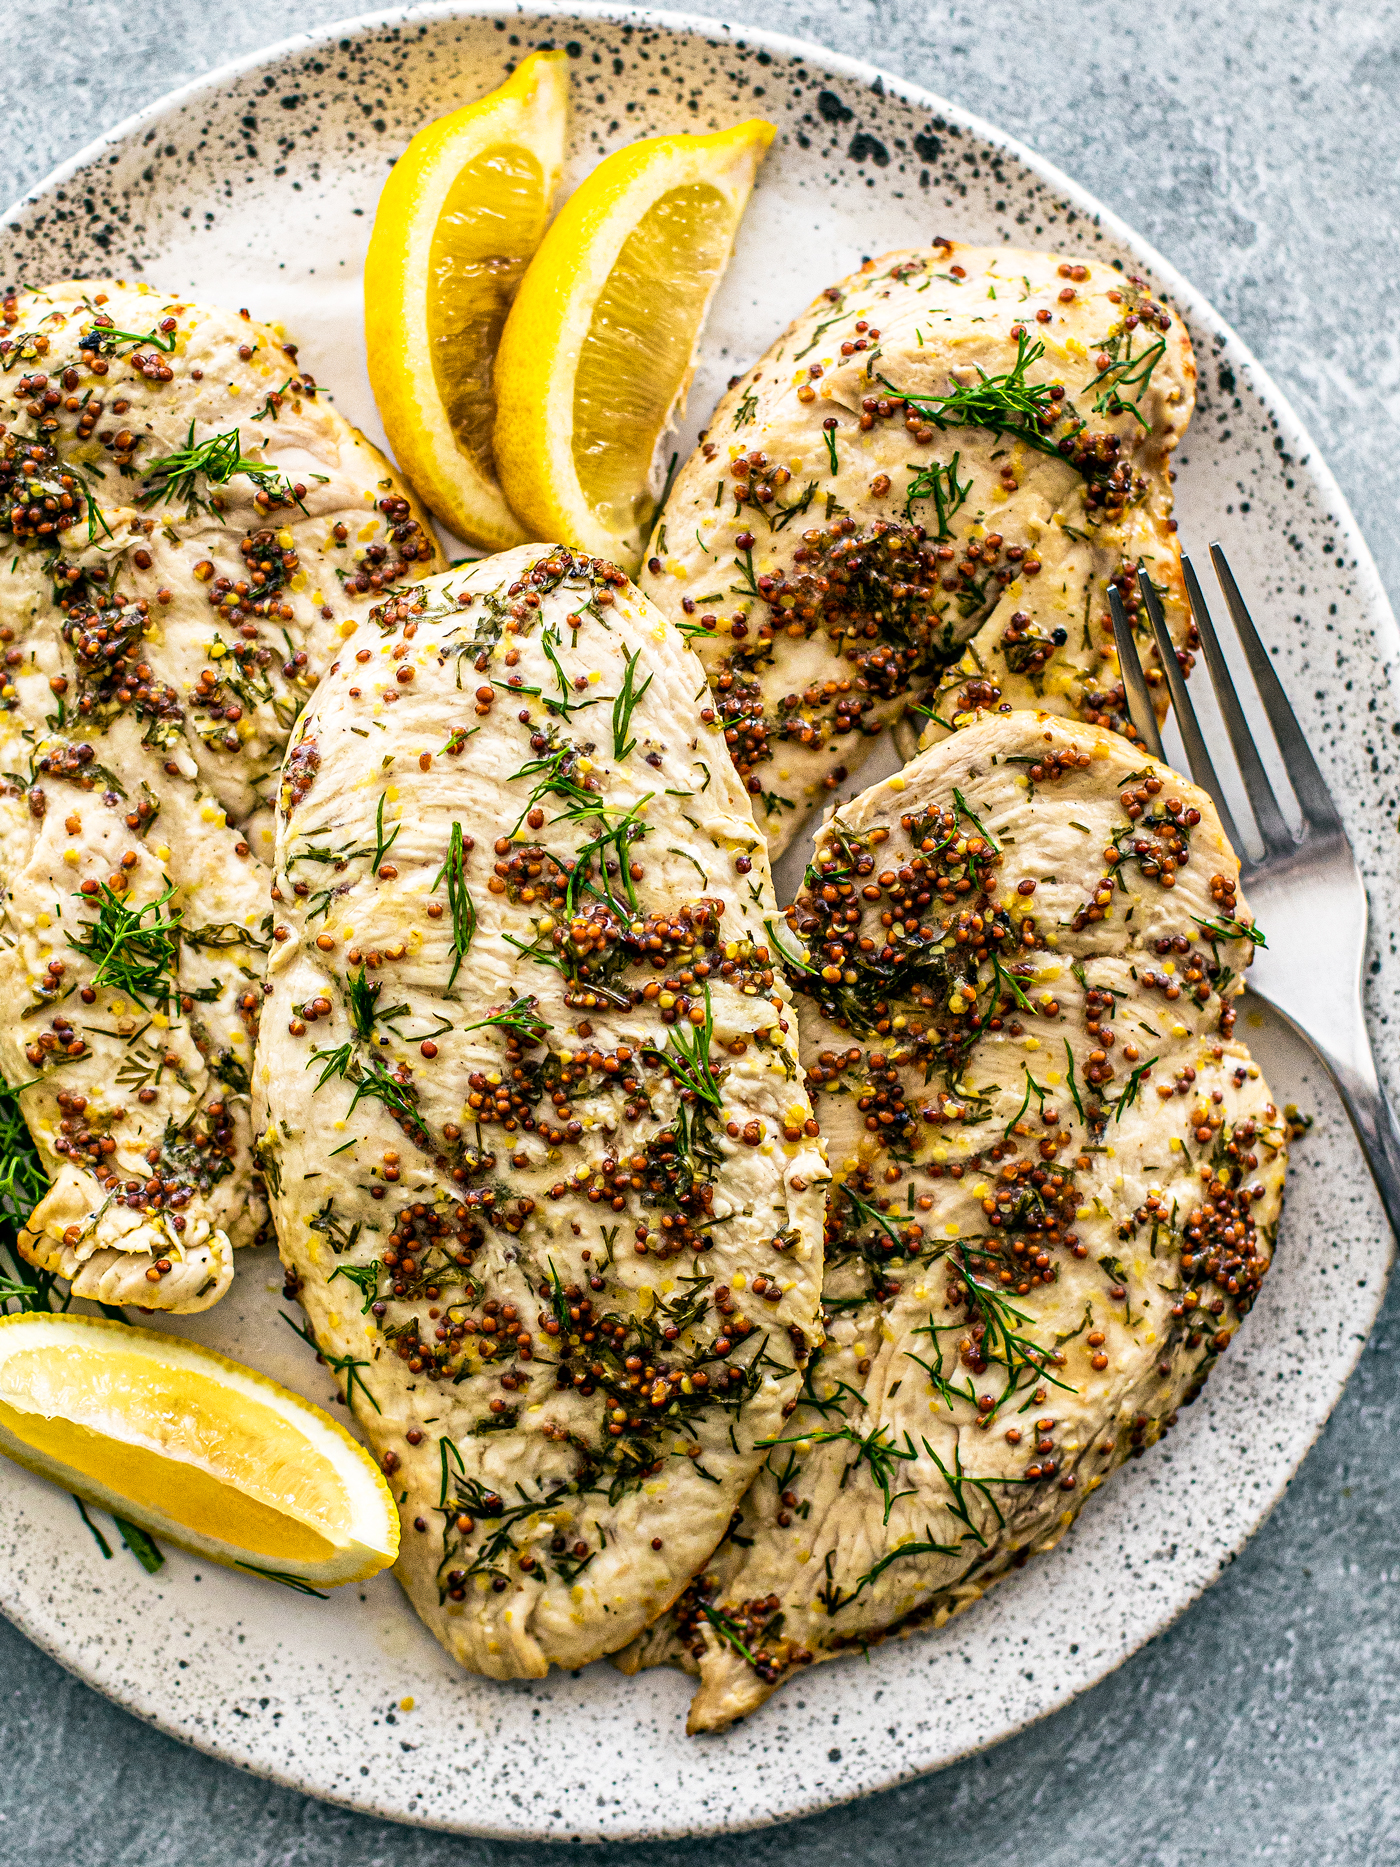 Plate of chicken breasts with lemon wedges and fresh dill sprigs.